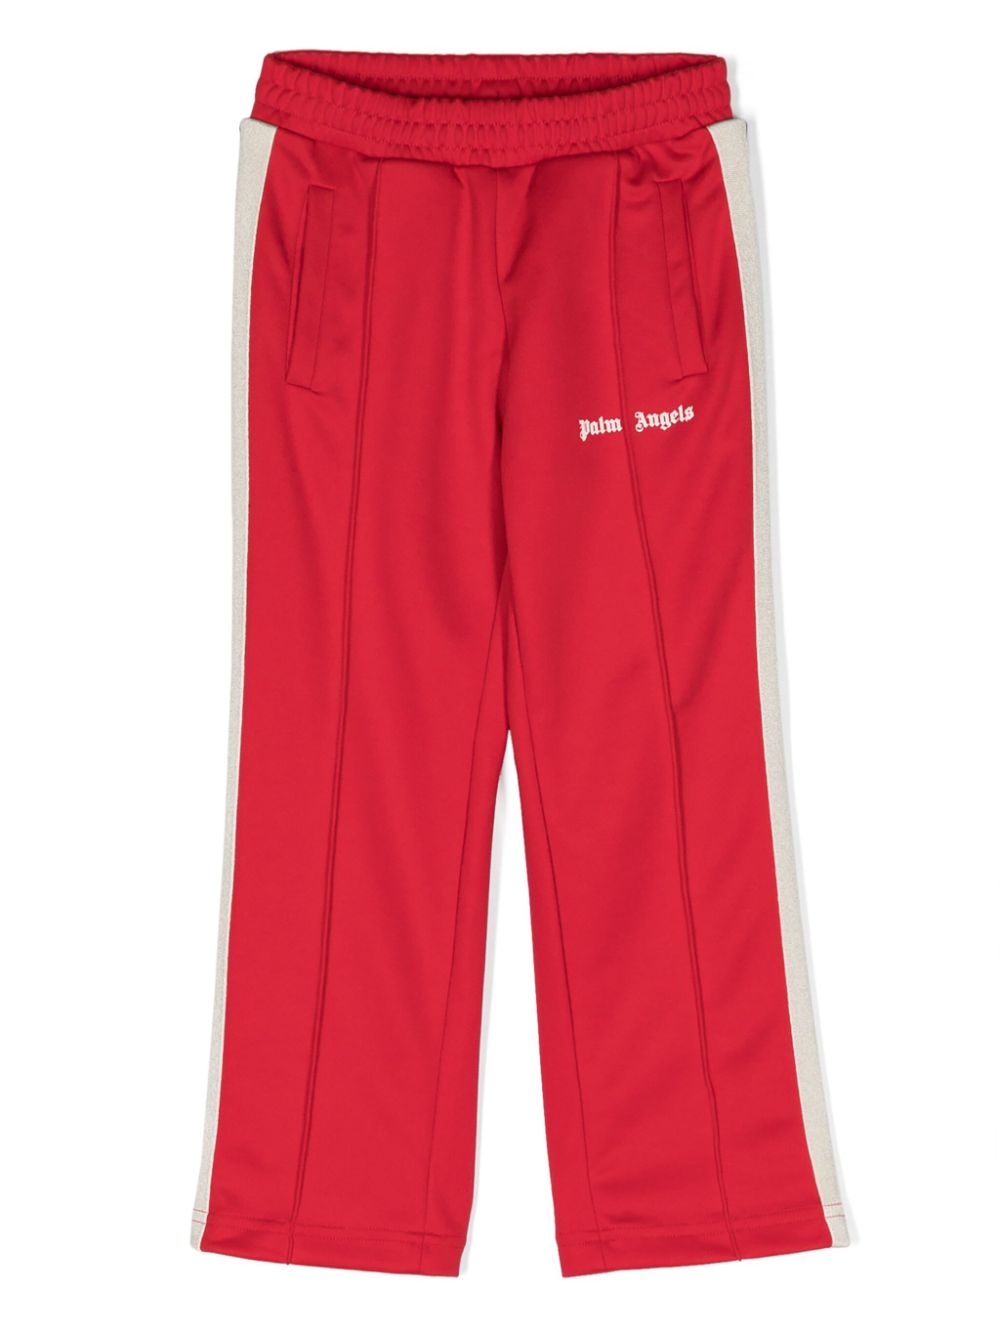 Red sports trousers for boys with logo